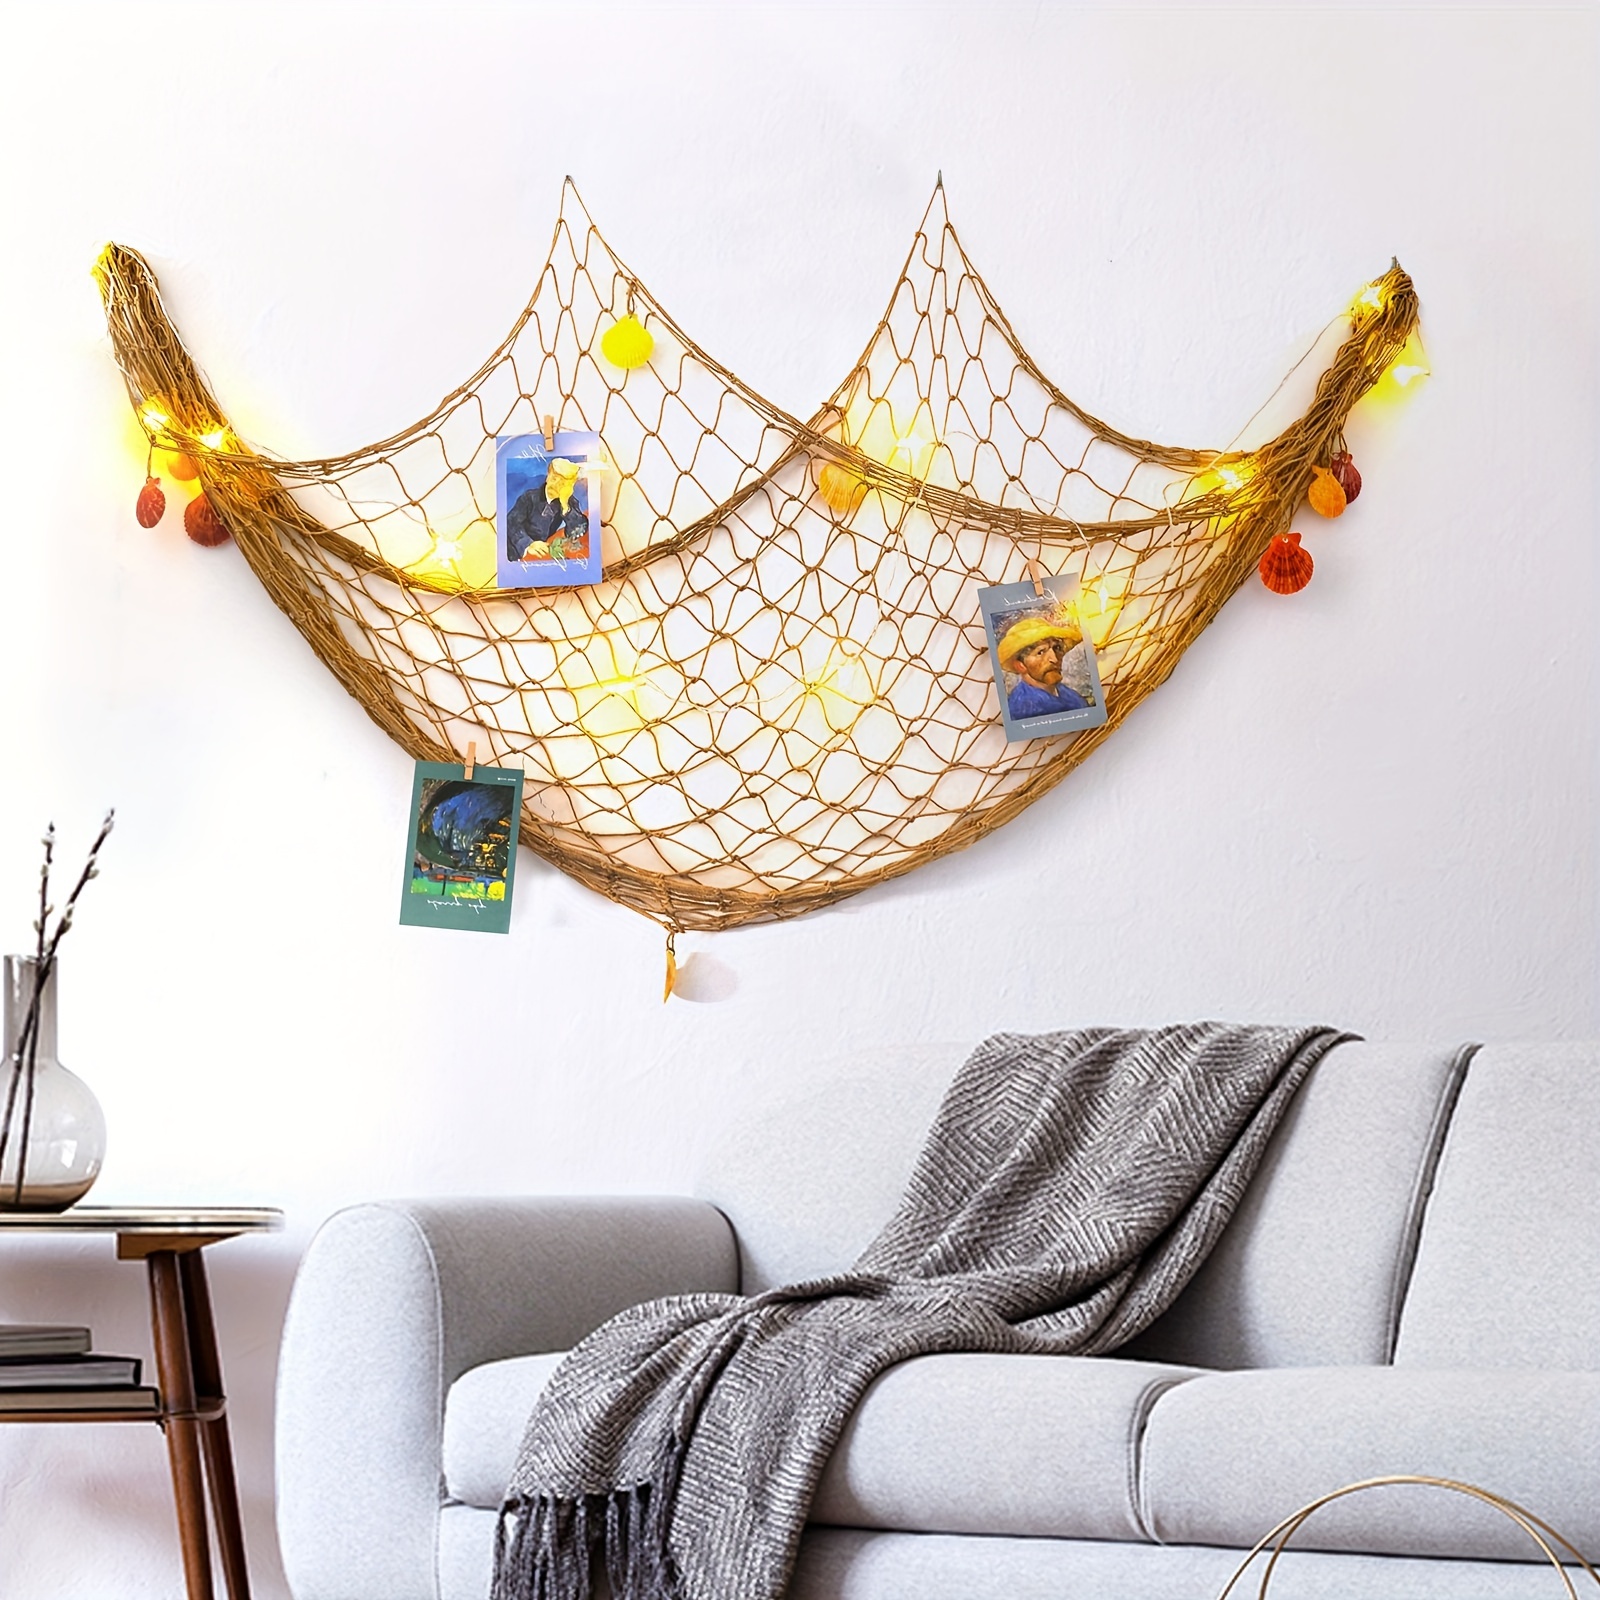 OJYUDD Fishing Net Decor, Fishnet Decor, Mediterranean Style Photographing  Decoration, Natural Fish Net, Fish Net Party Accessory and Wall Table Decor